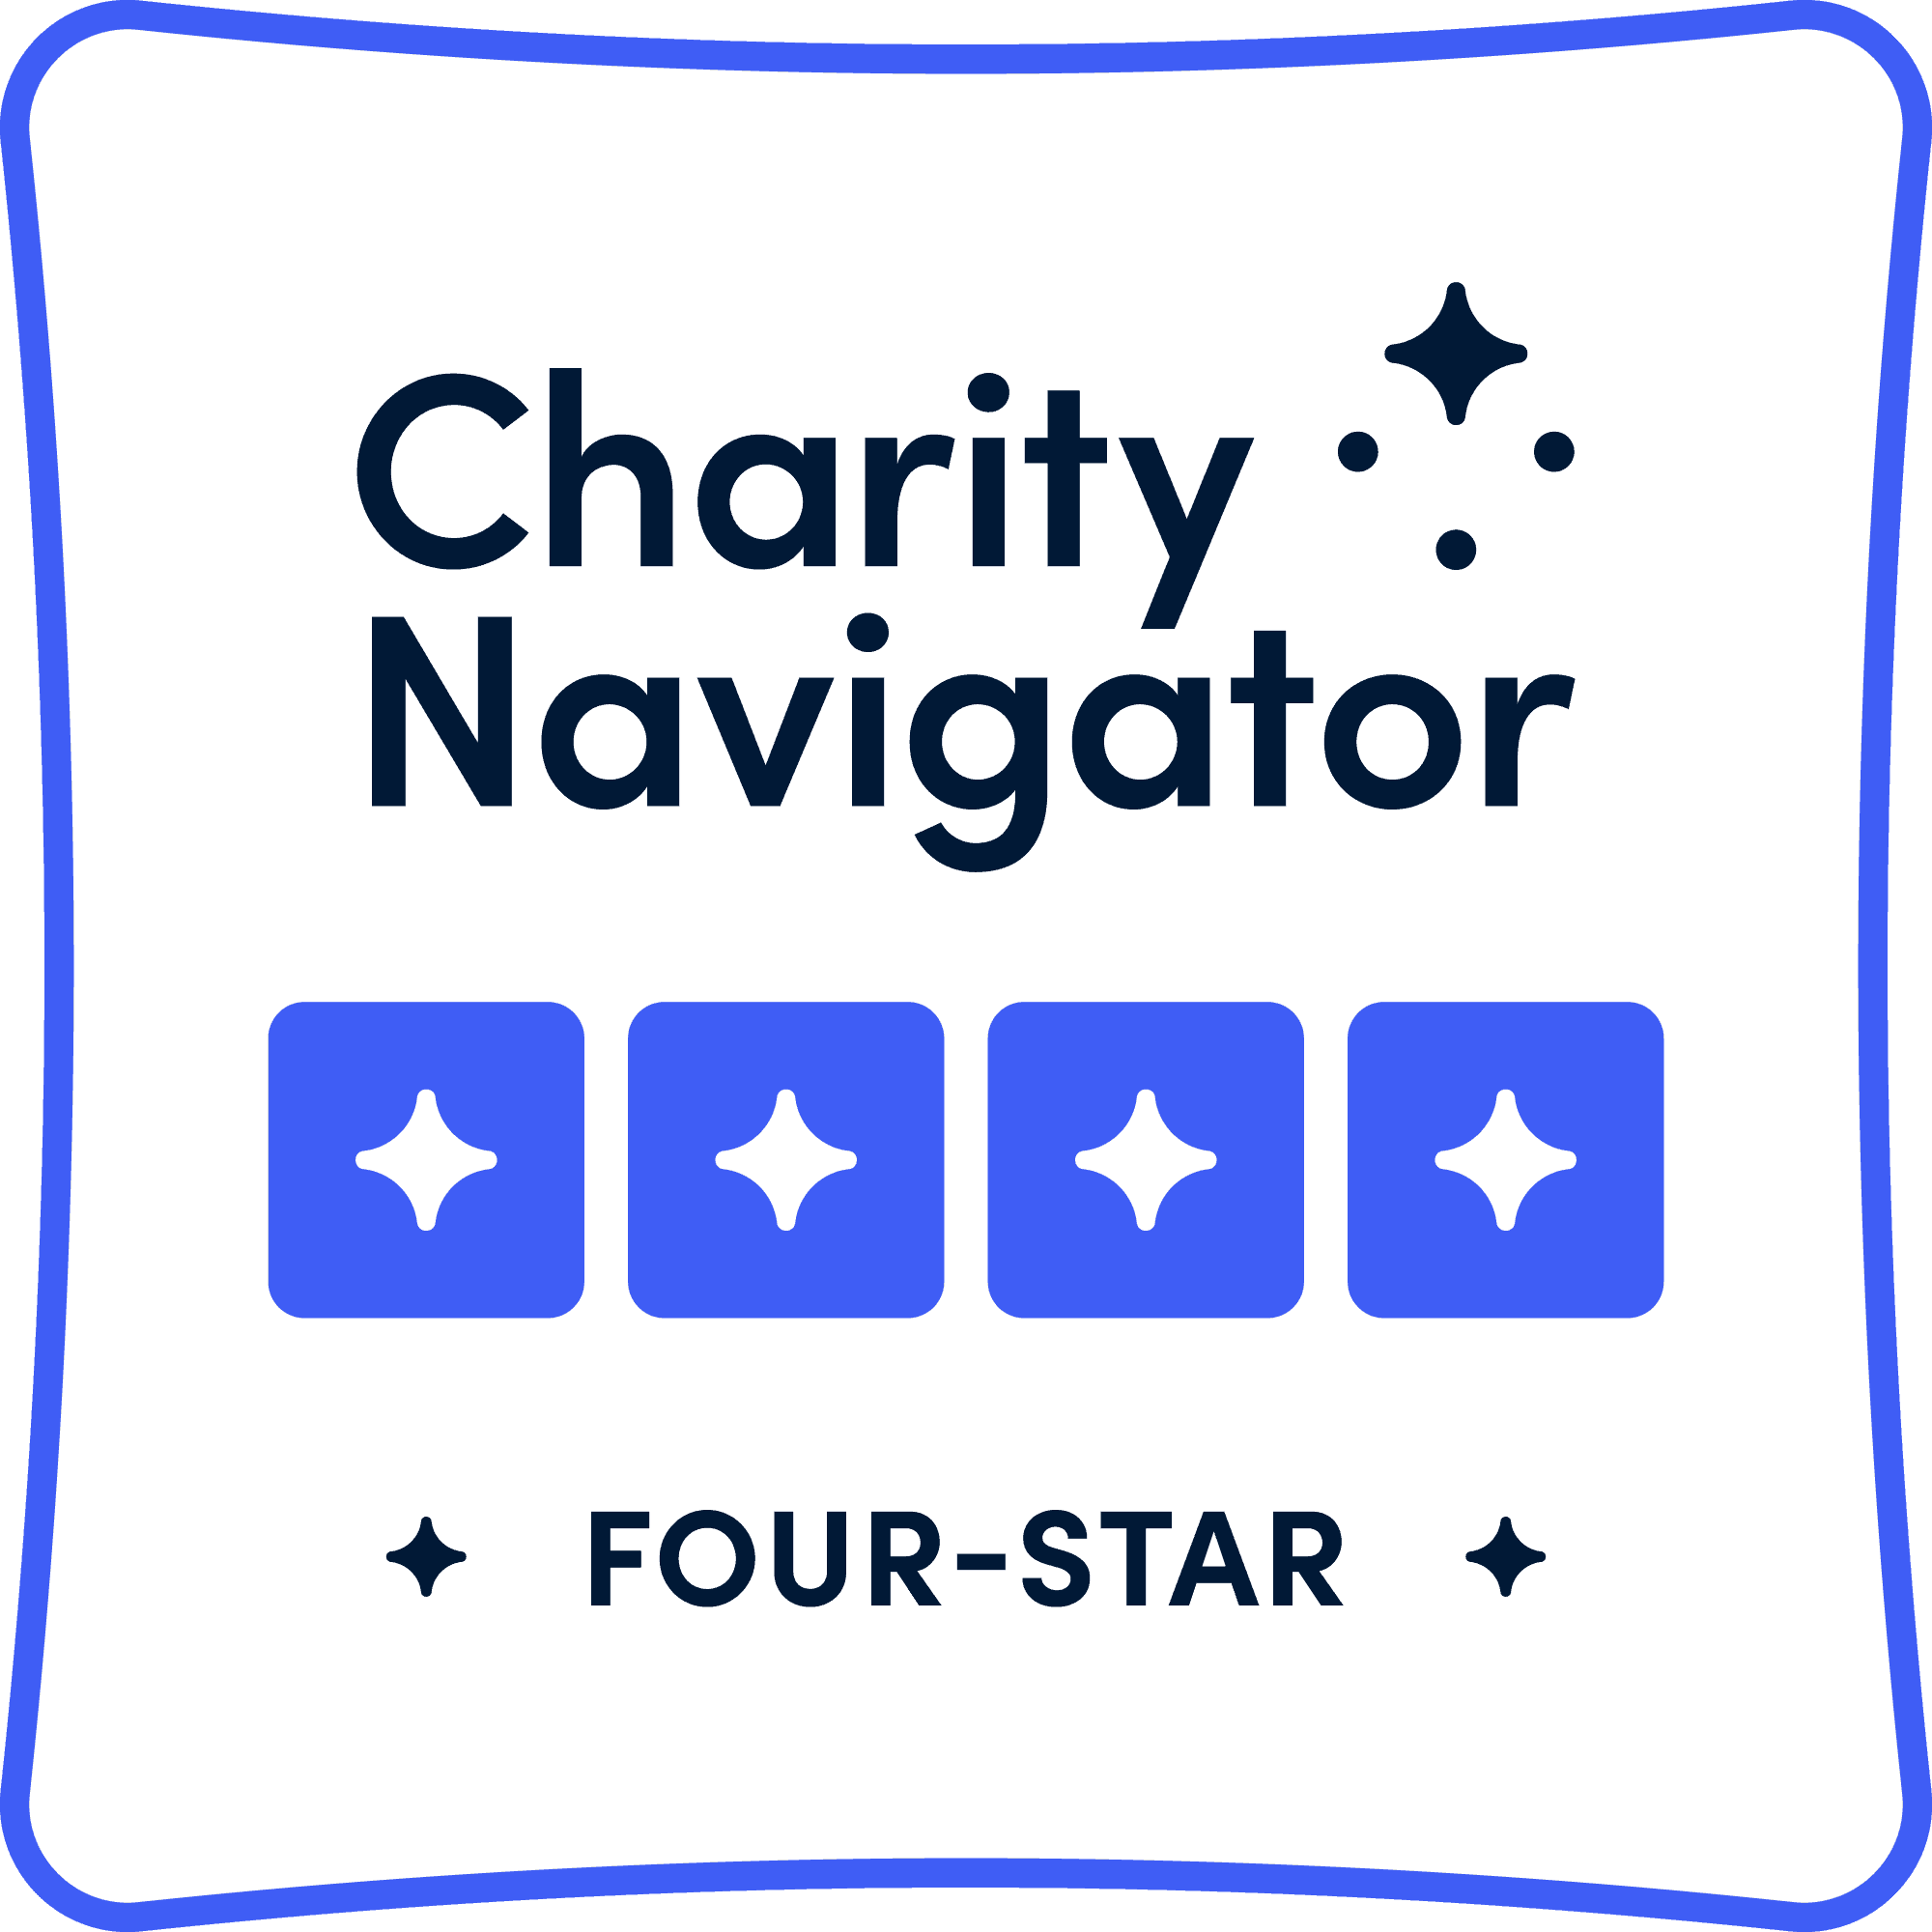 GYAC Earns Four-Star Rating from Charity Navigator